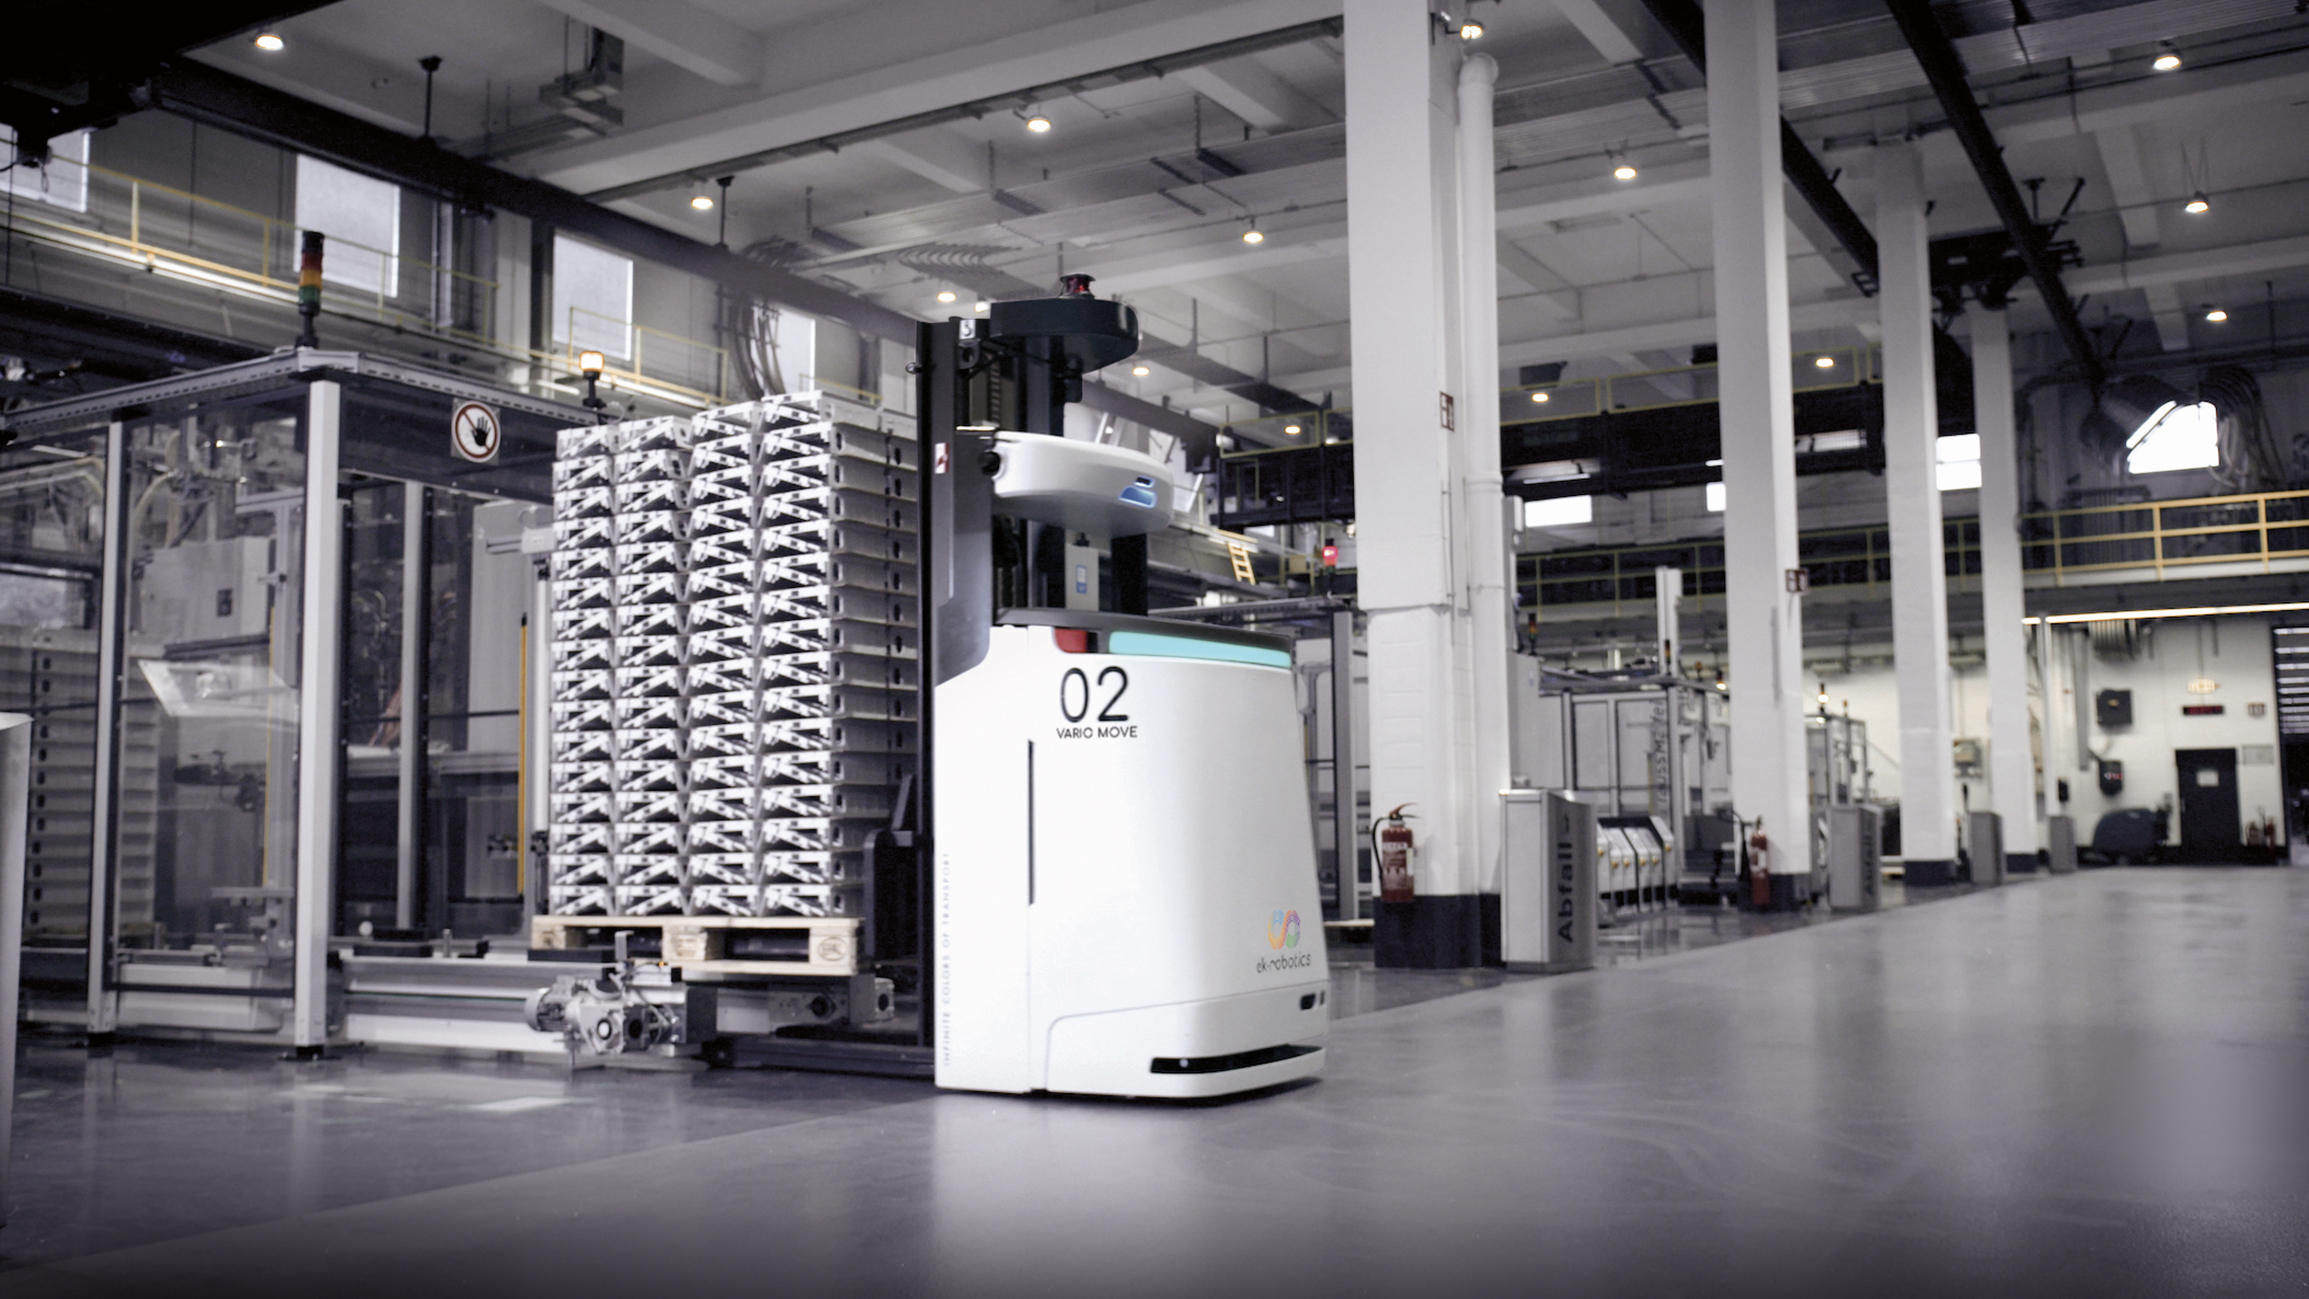 VARIO MOVE - Automated Guided Transportrobot